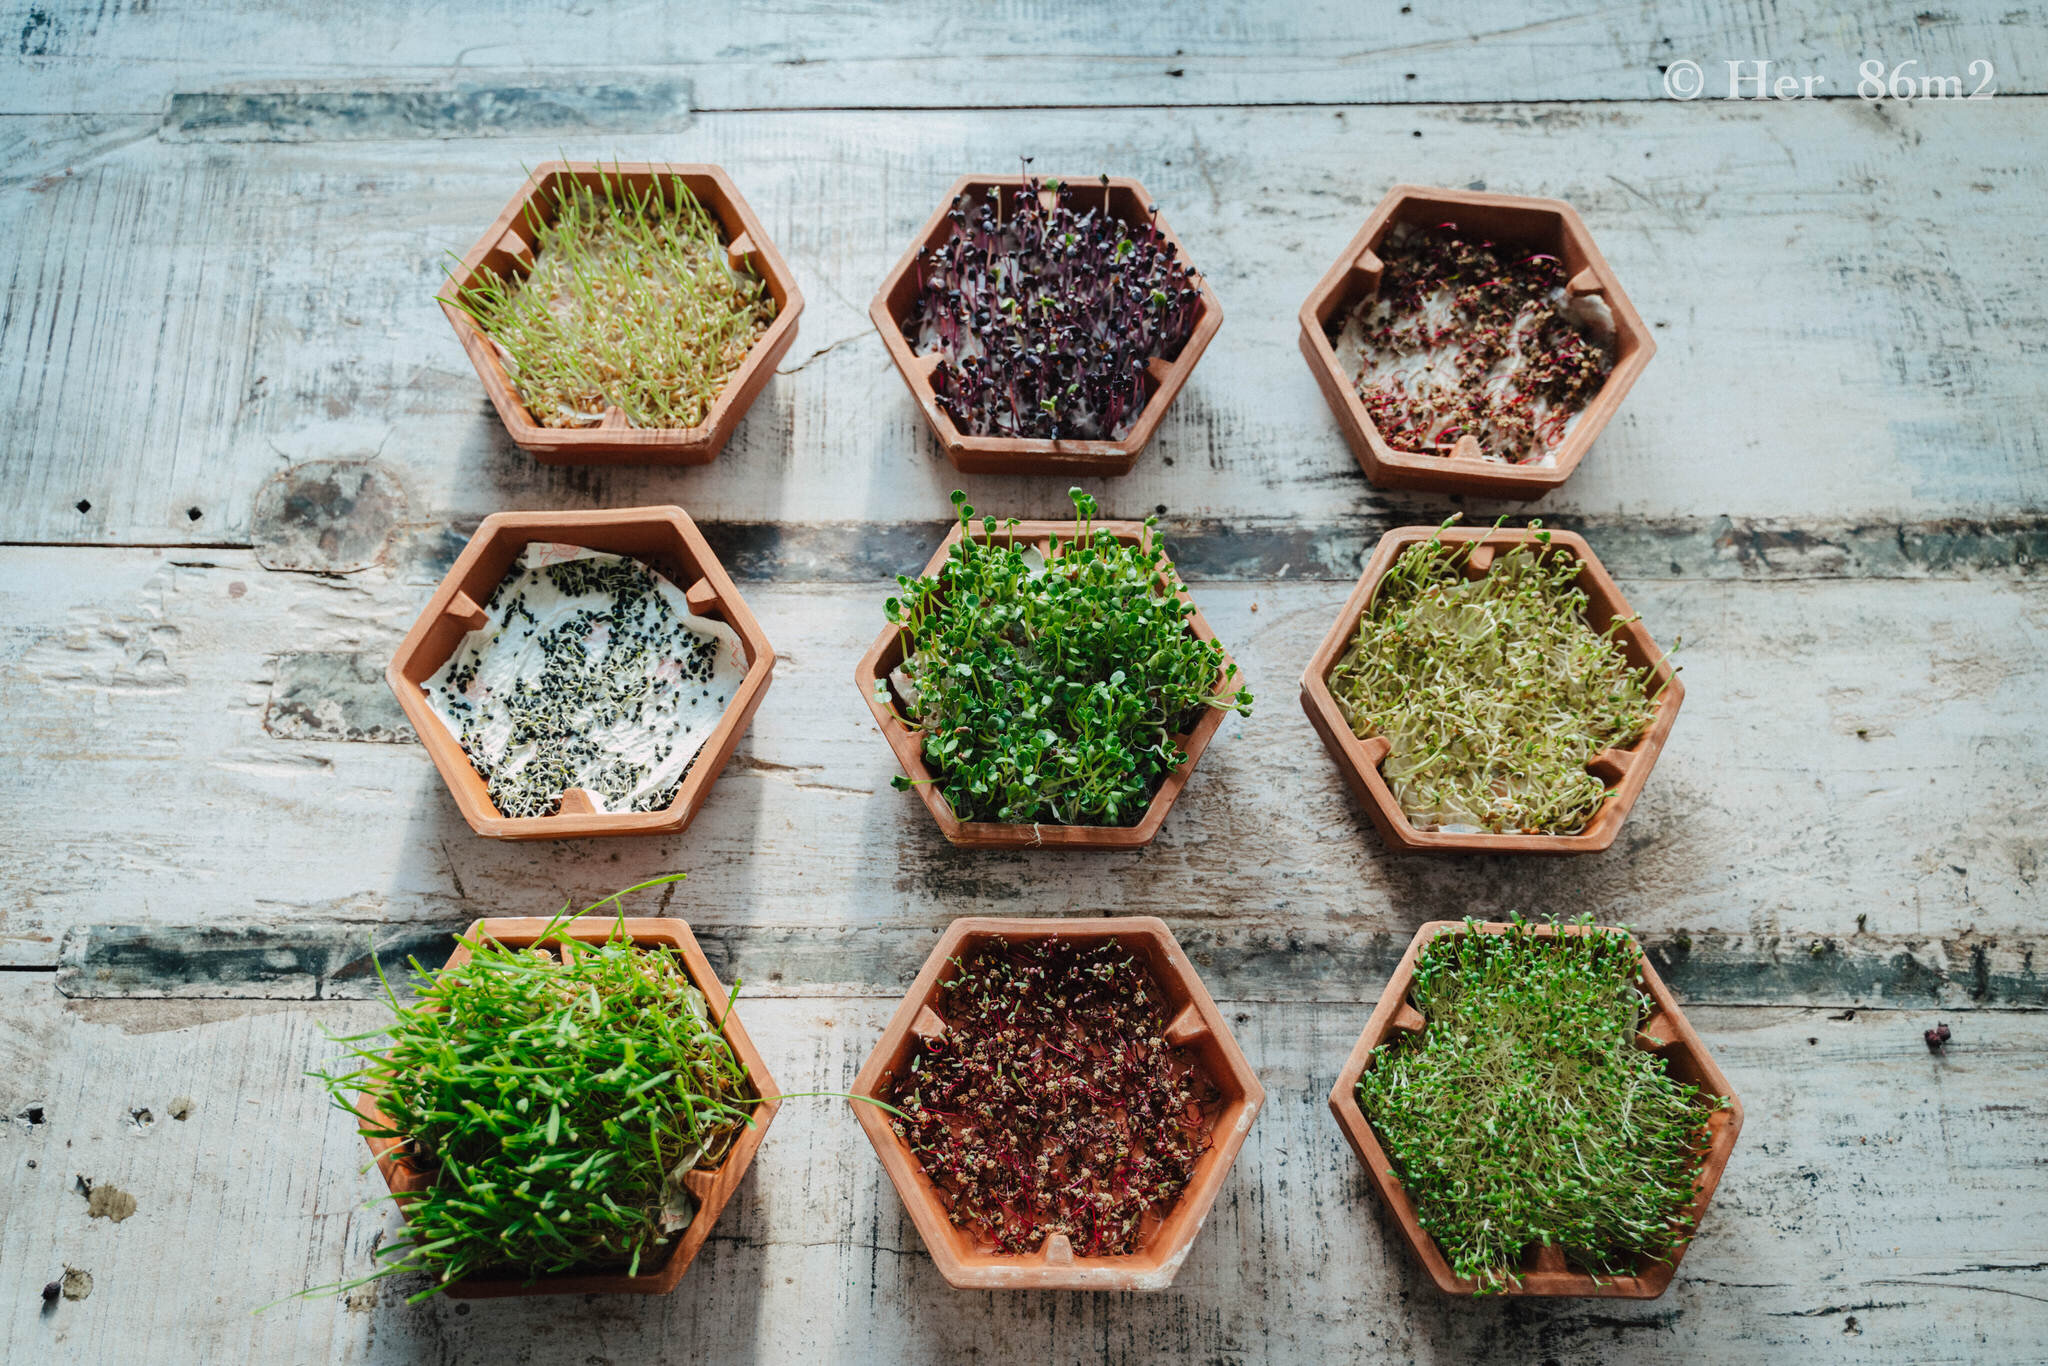 Grow Vegetables Indoors - Microgreens & Sprouts - From Seed to Harvest 18.JPG